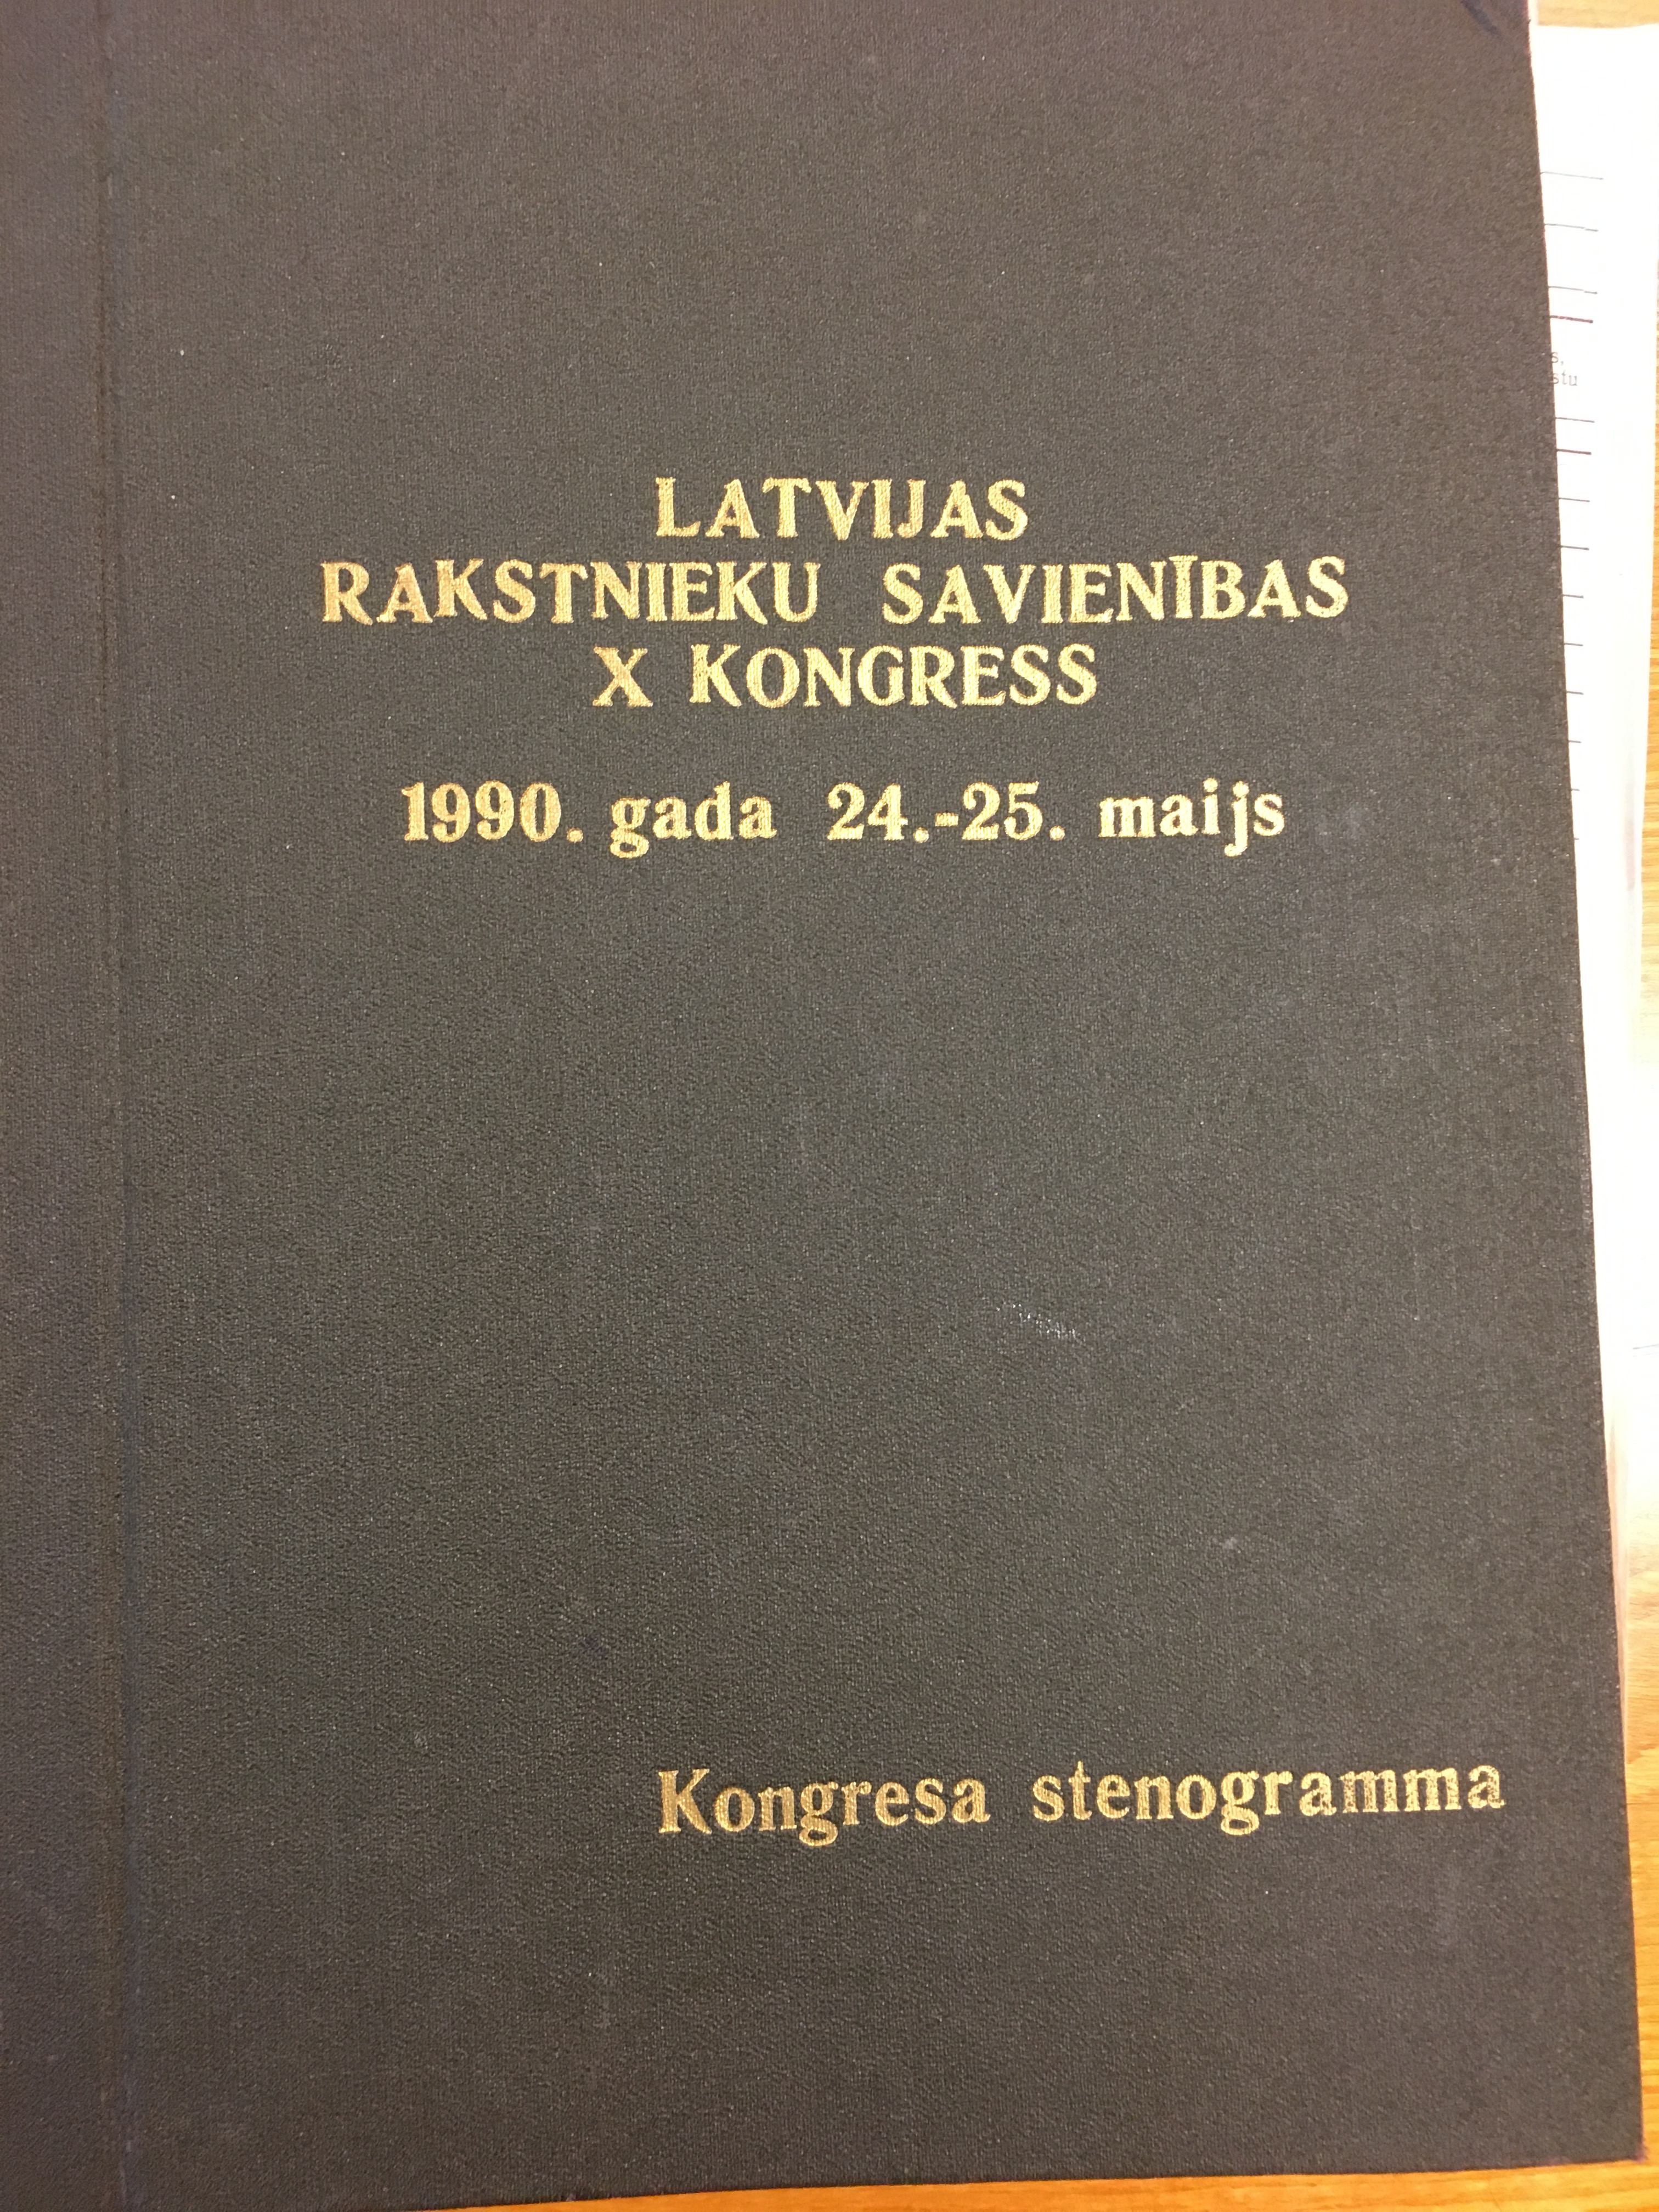 Cover of materials of the 10th congress at which Latvian Writers'Union started to operate under the present name